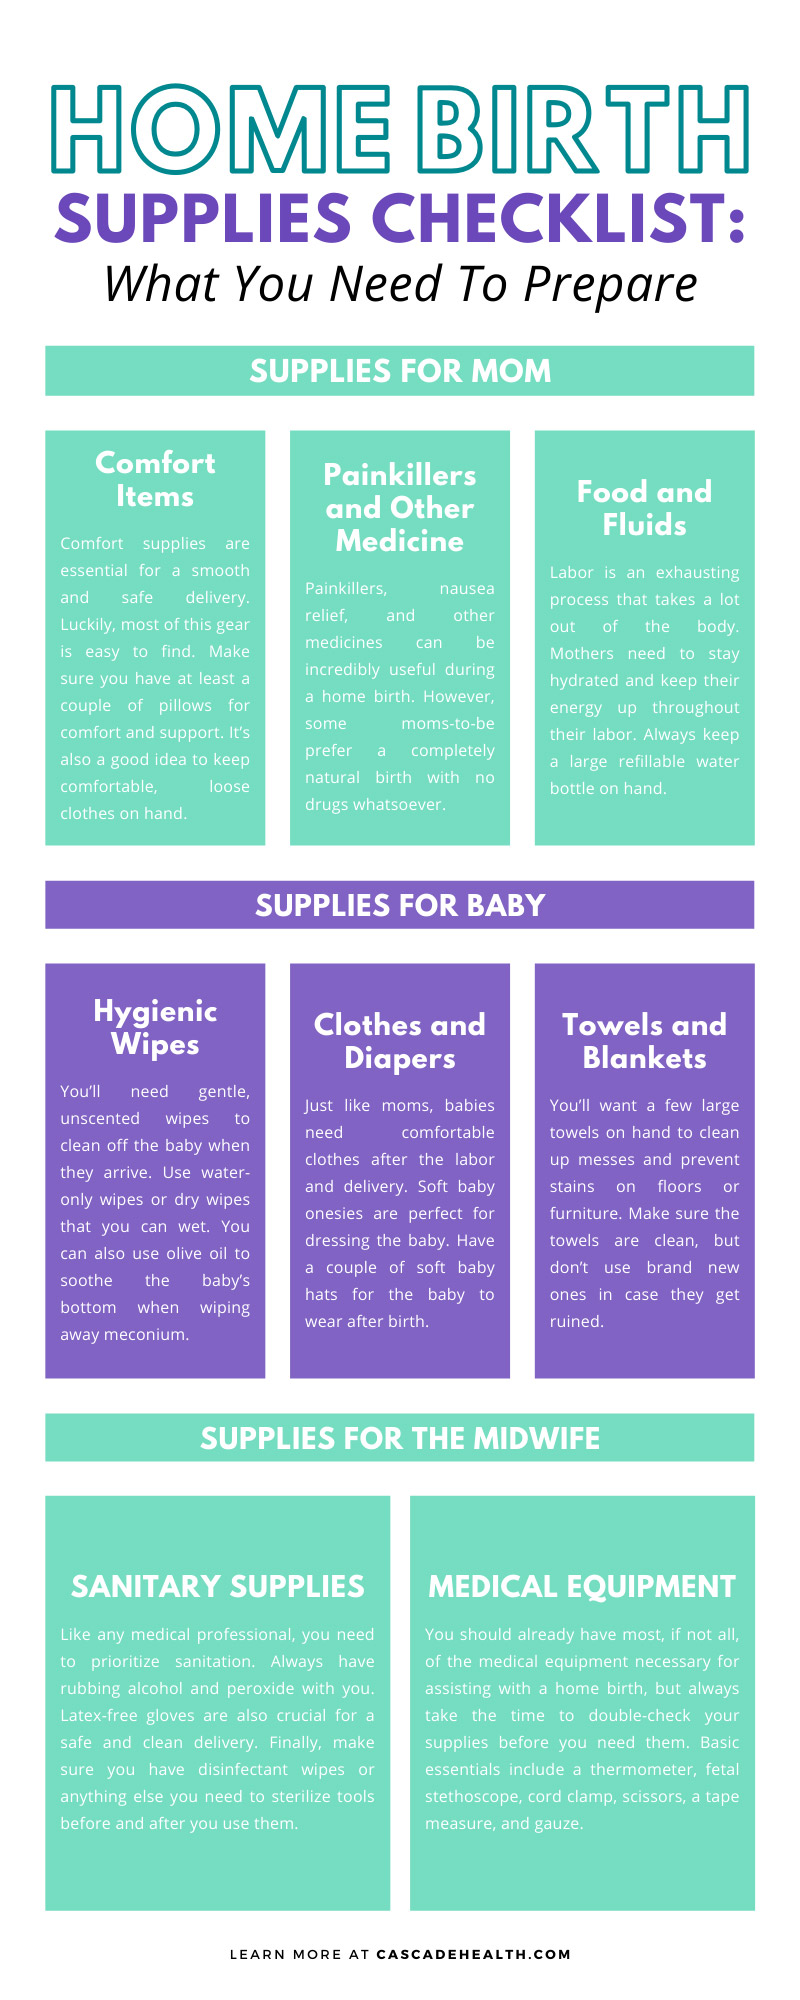 Home Birth Supplies Checklist: What You Need To Prepare